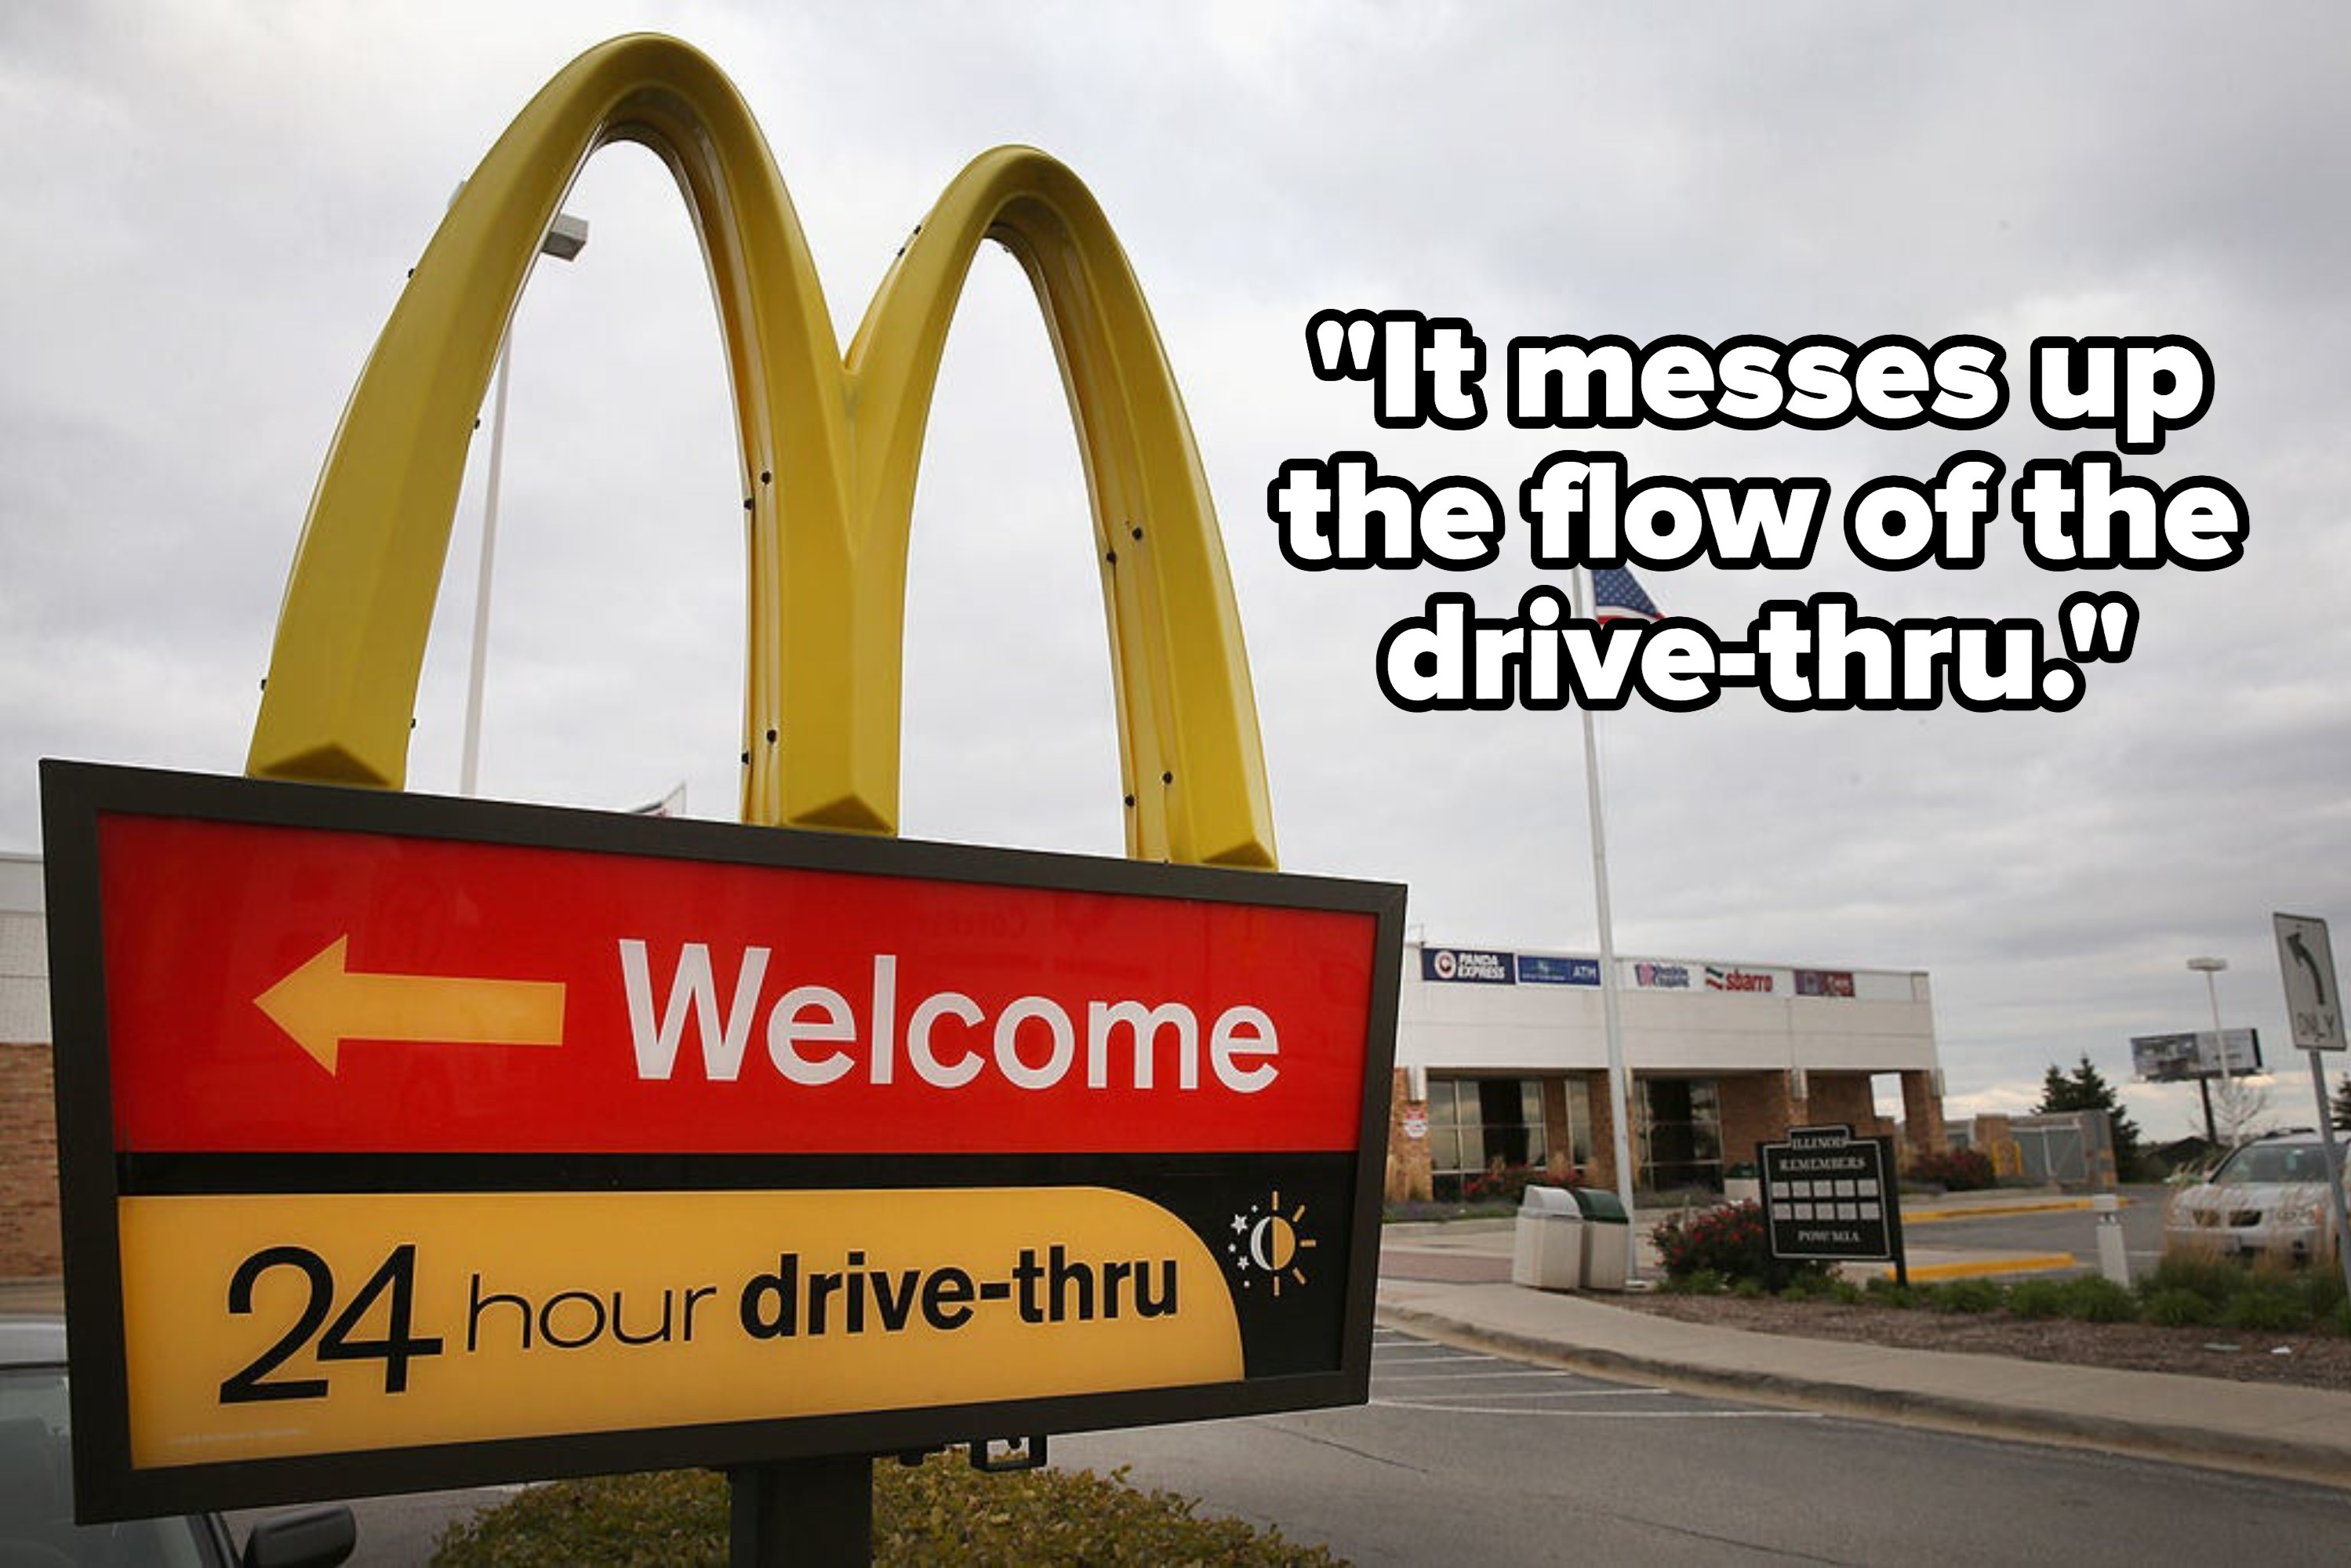 &quot;it messes up the flow of the drive-thru&quot; over a mcdonalds drive-thru sign